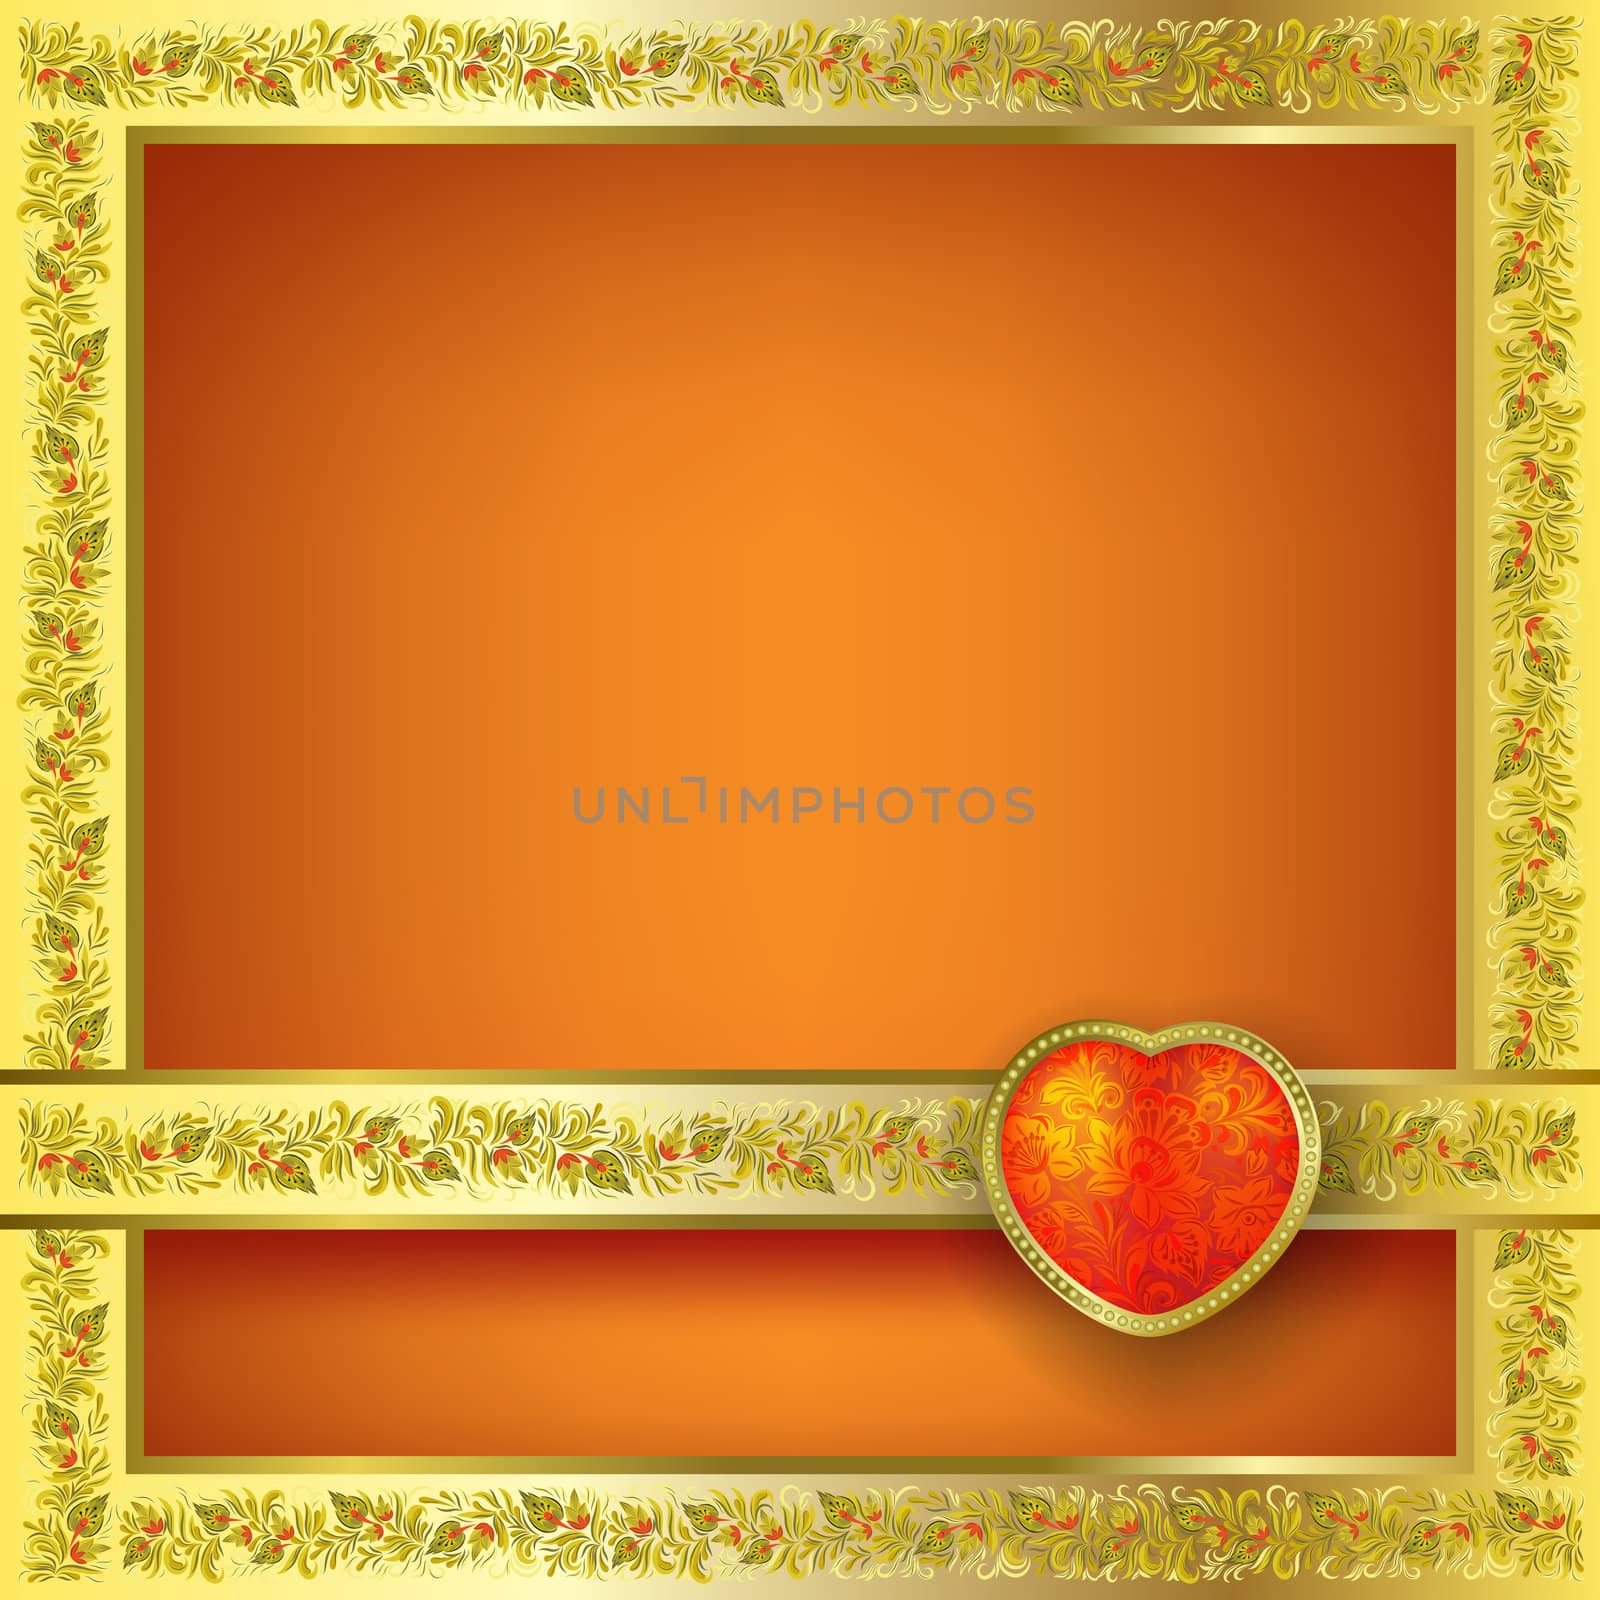 Valentines greeting with red heart on orange floral background